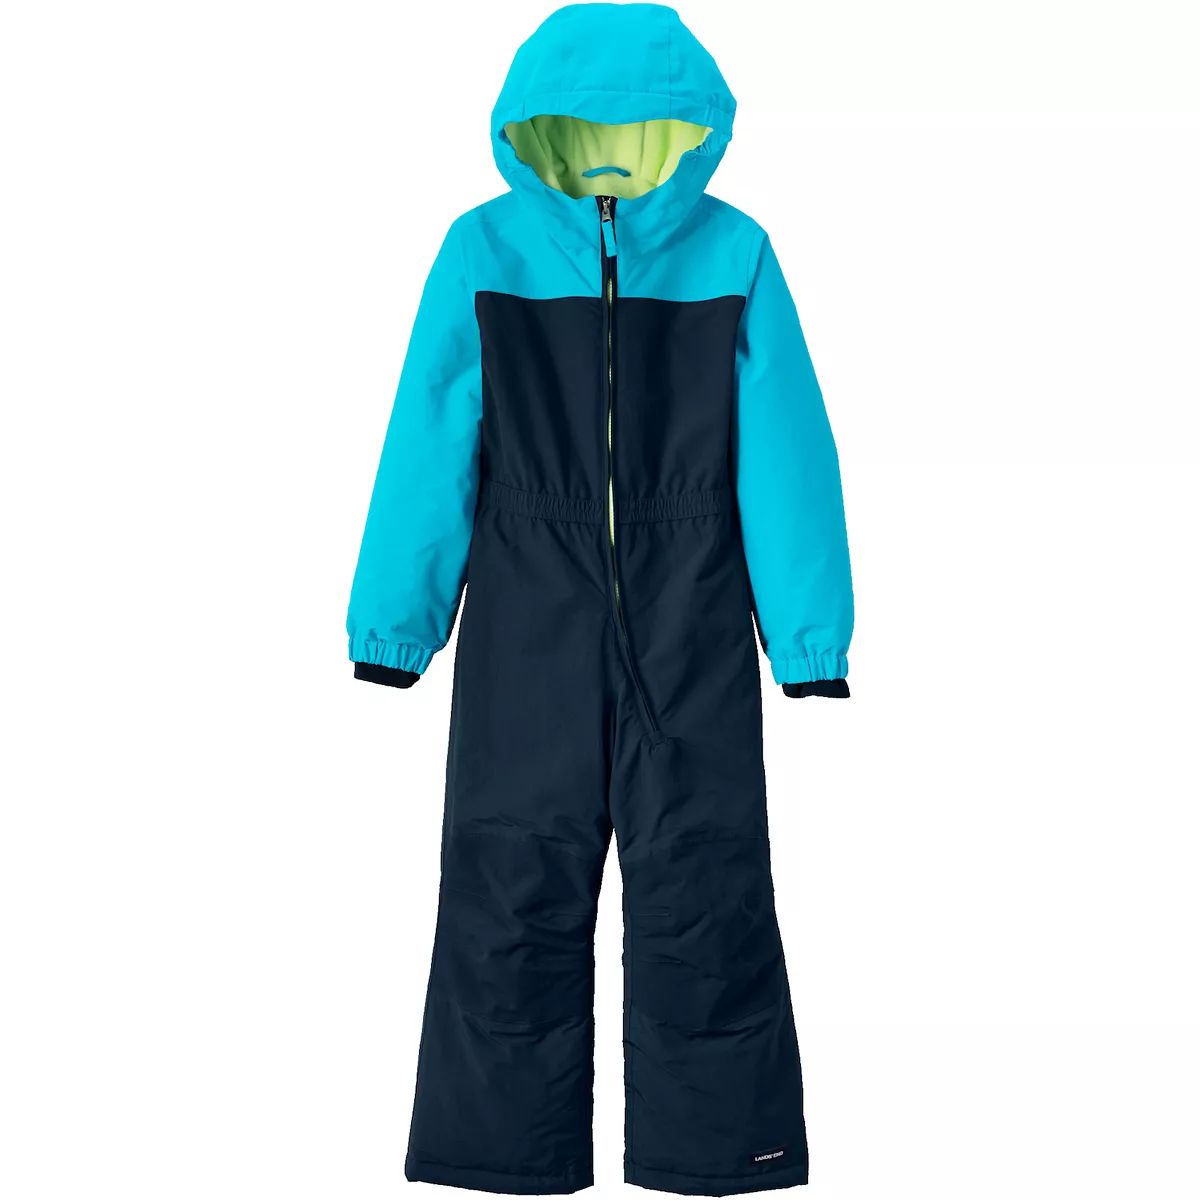 Kids 3-6 Lands' End Squall Waterproof Insulated Iron Knee Winter Snow Suit | Kohl's